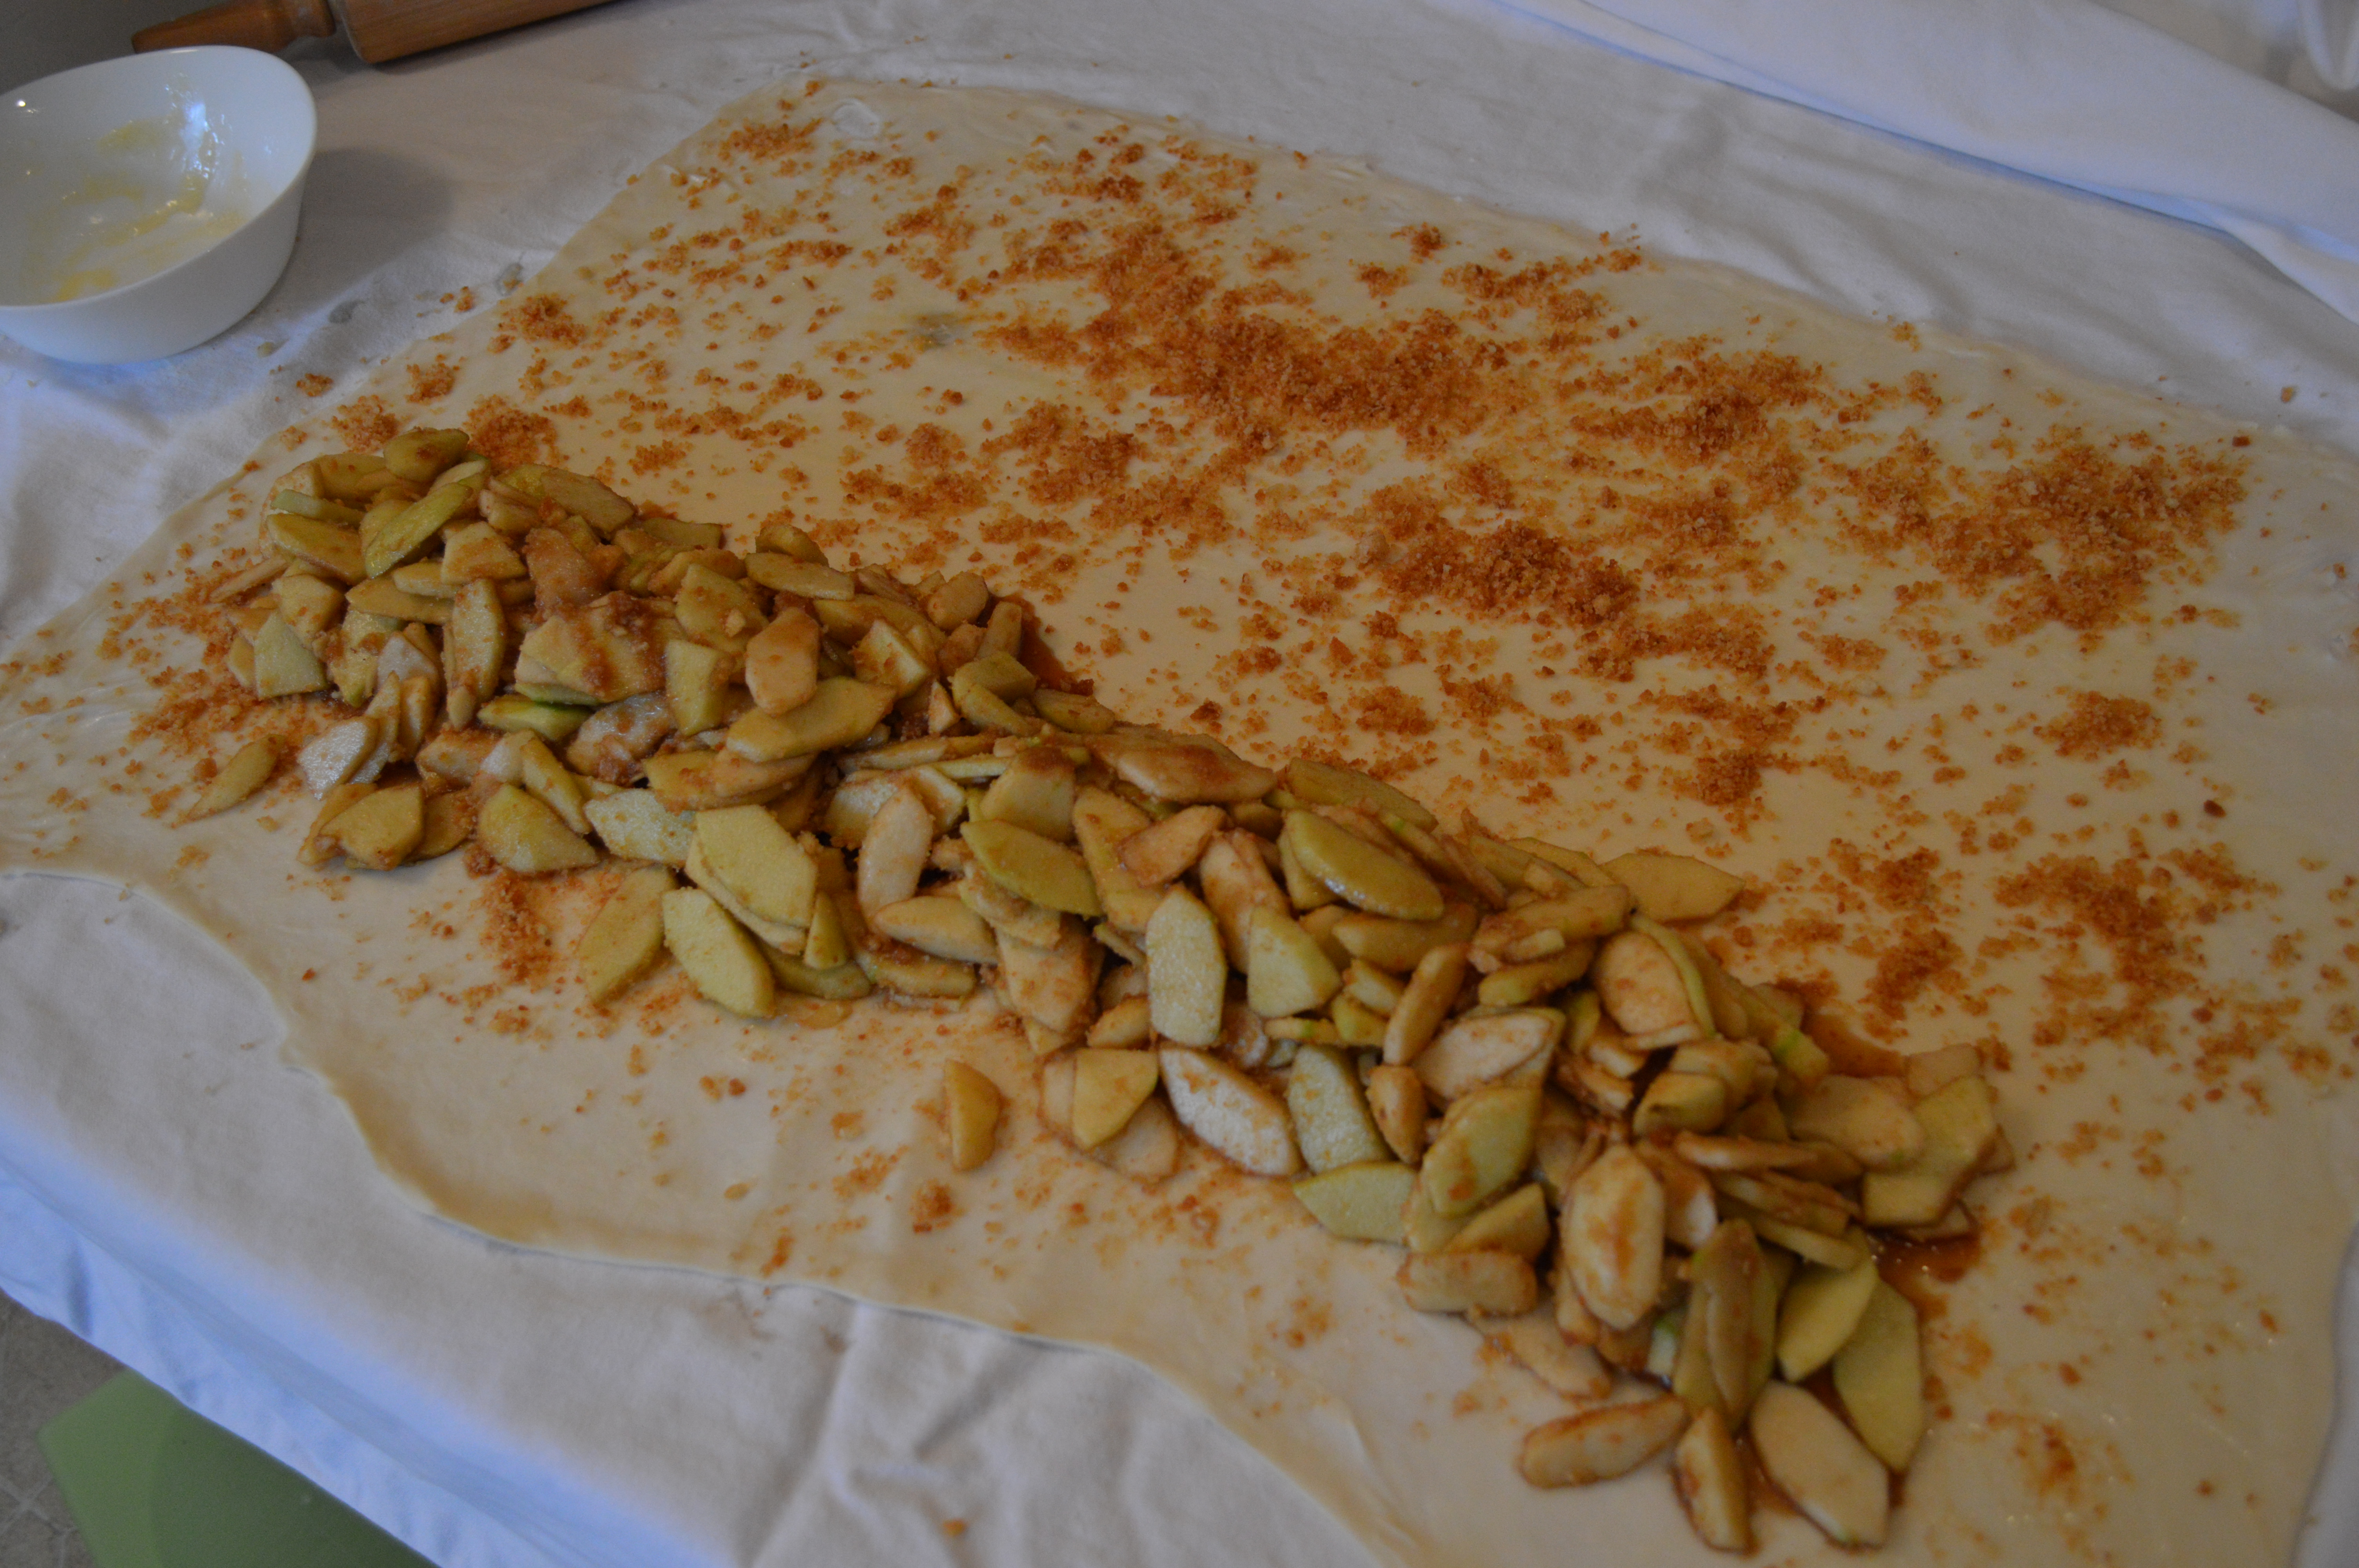 Filling the strudel dough with toasted breadcrumbs and apples